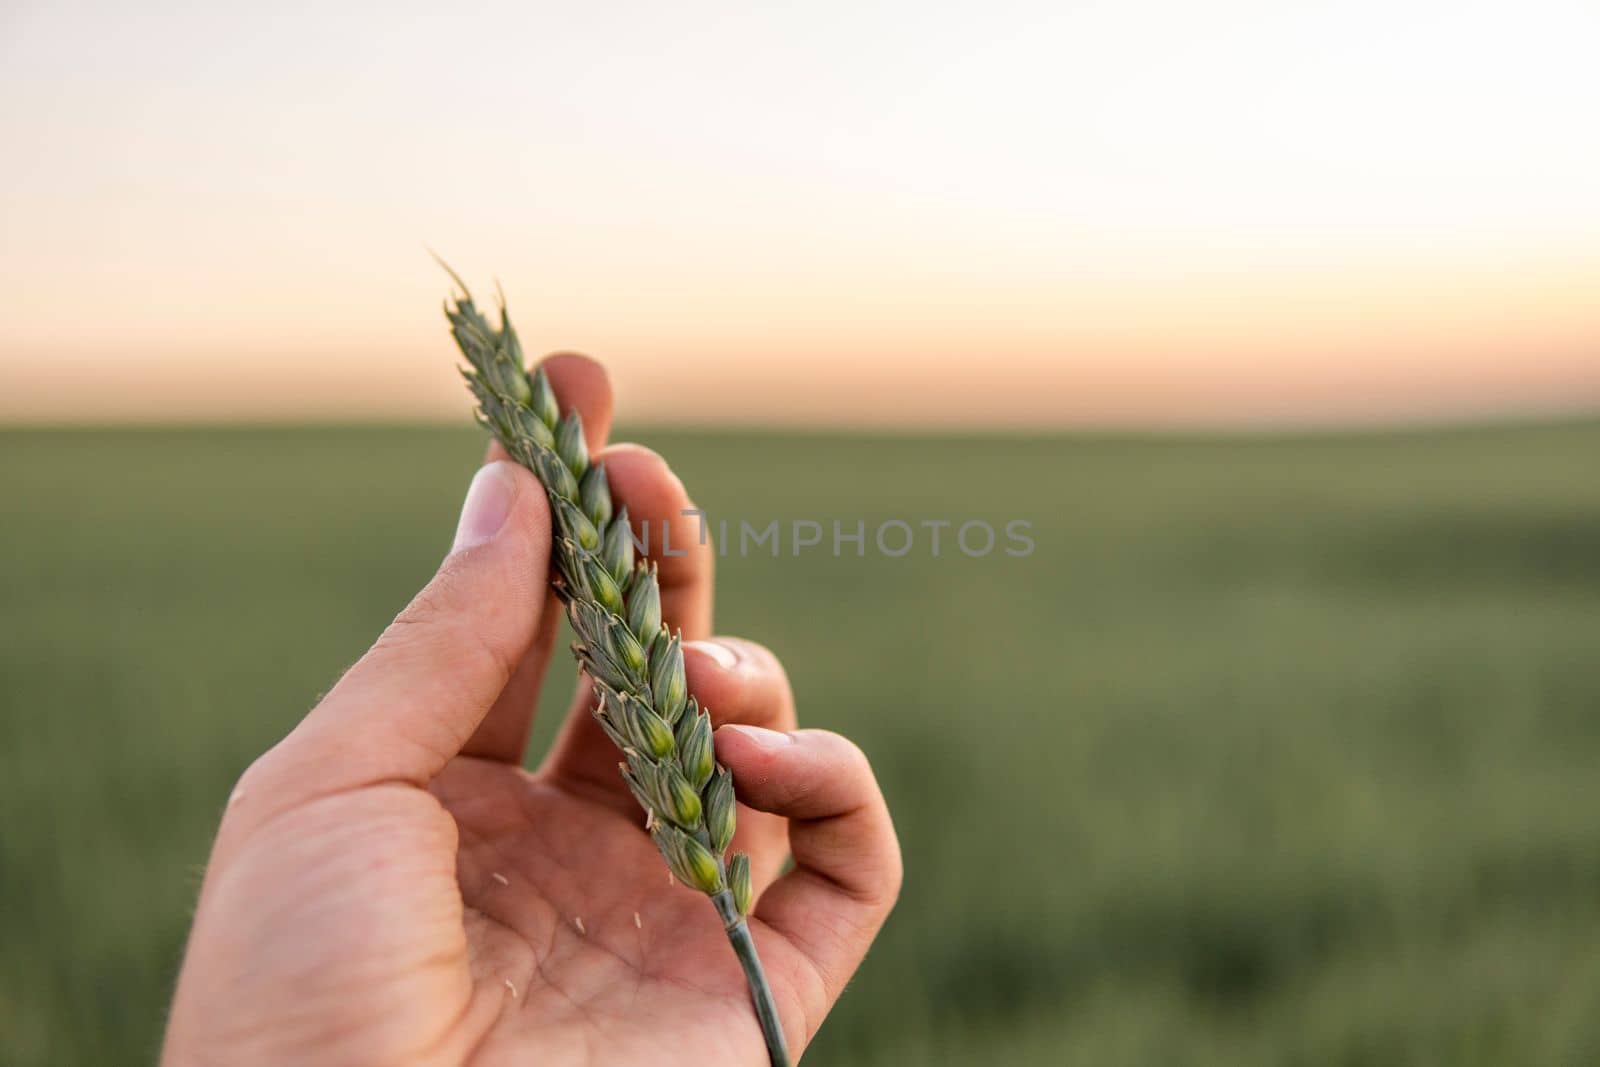 Farmer checking his crops on an agricultural field. Ripening ears of wheat field